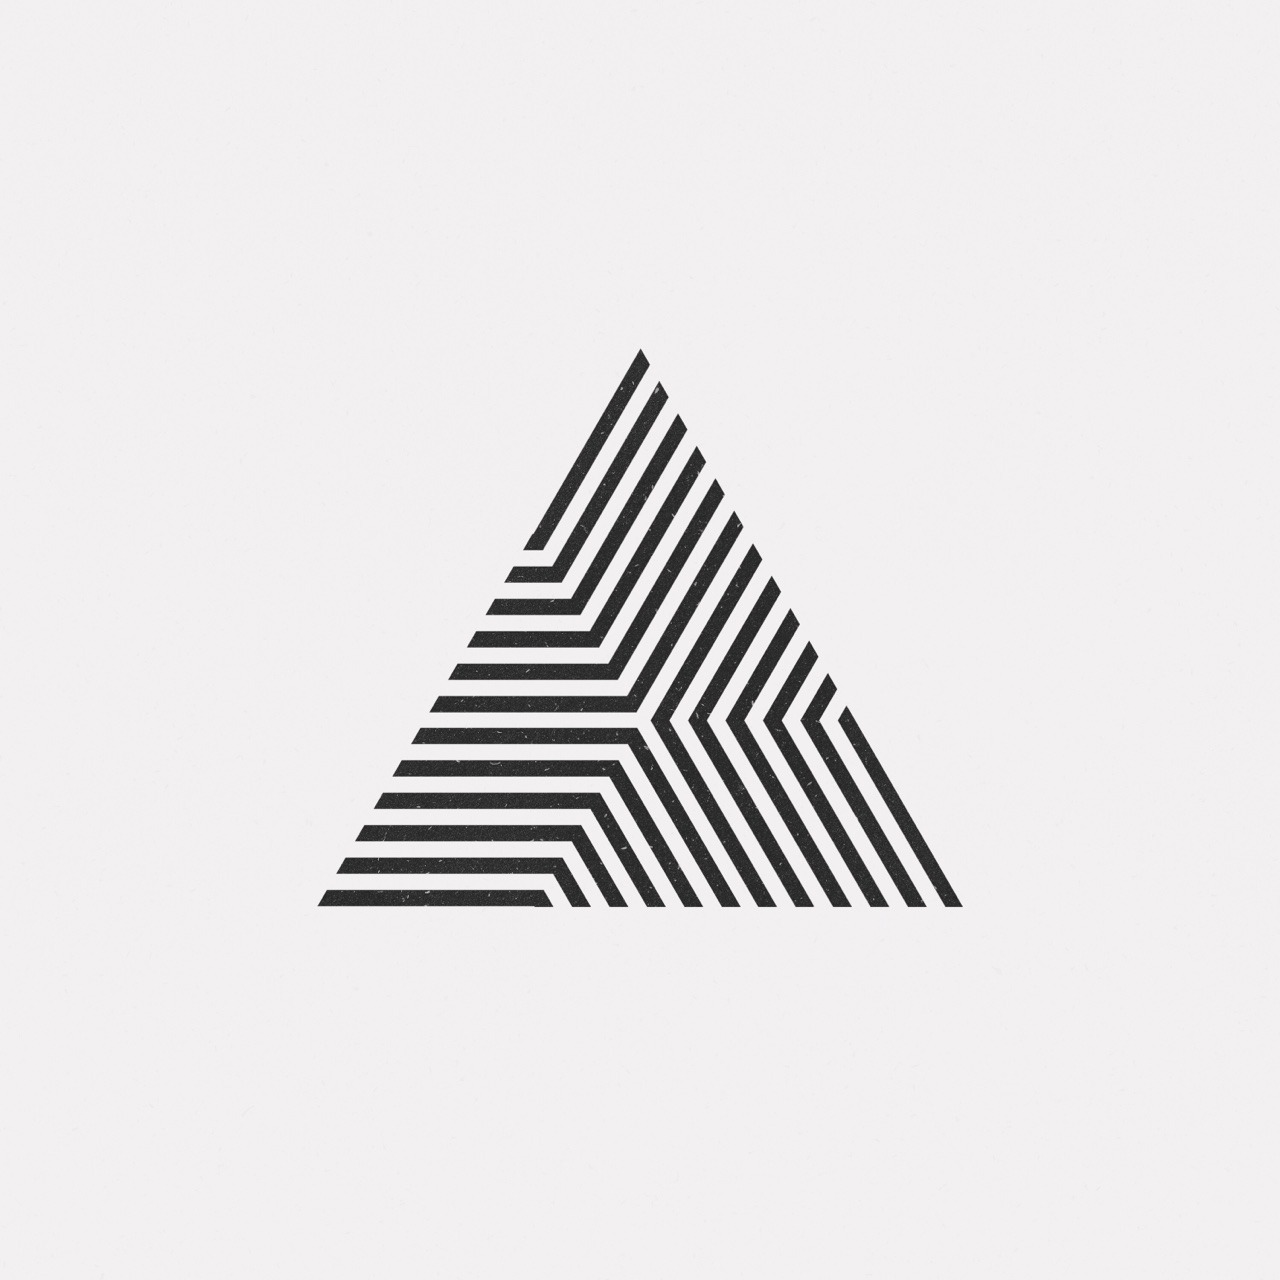 Pin by 崴 羅 on Minimalism | Triangle graphic design, Triangle graphic ...